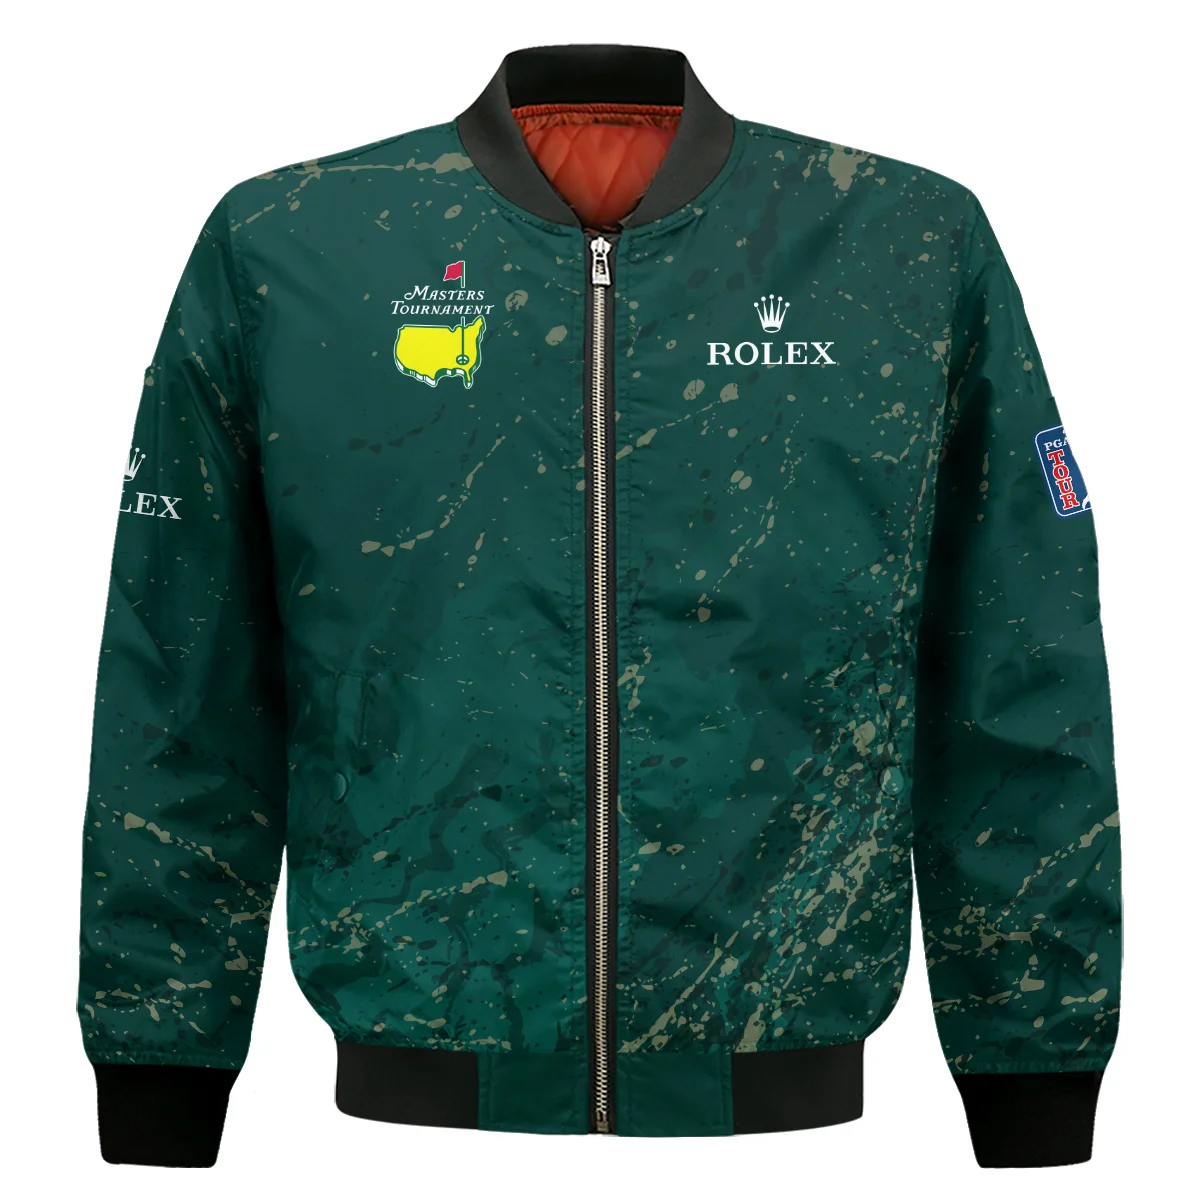 Old Cracked Texture With Gold Splash Paint Masters Tournament Rolex Bomber Jacket Style Classic Bomber Jacket